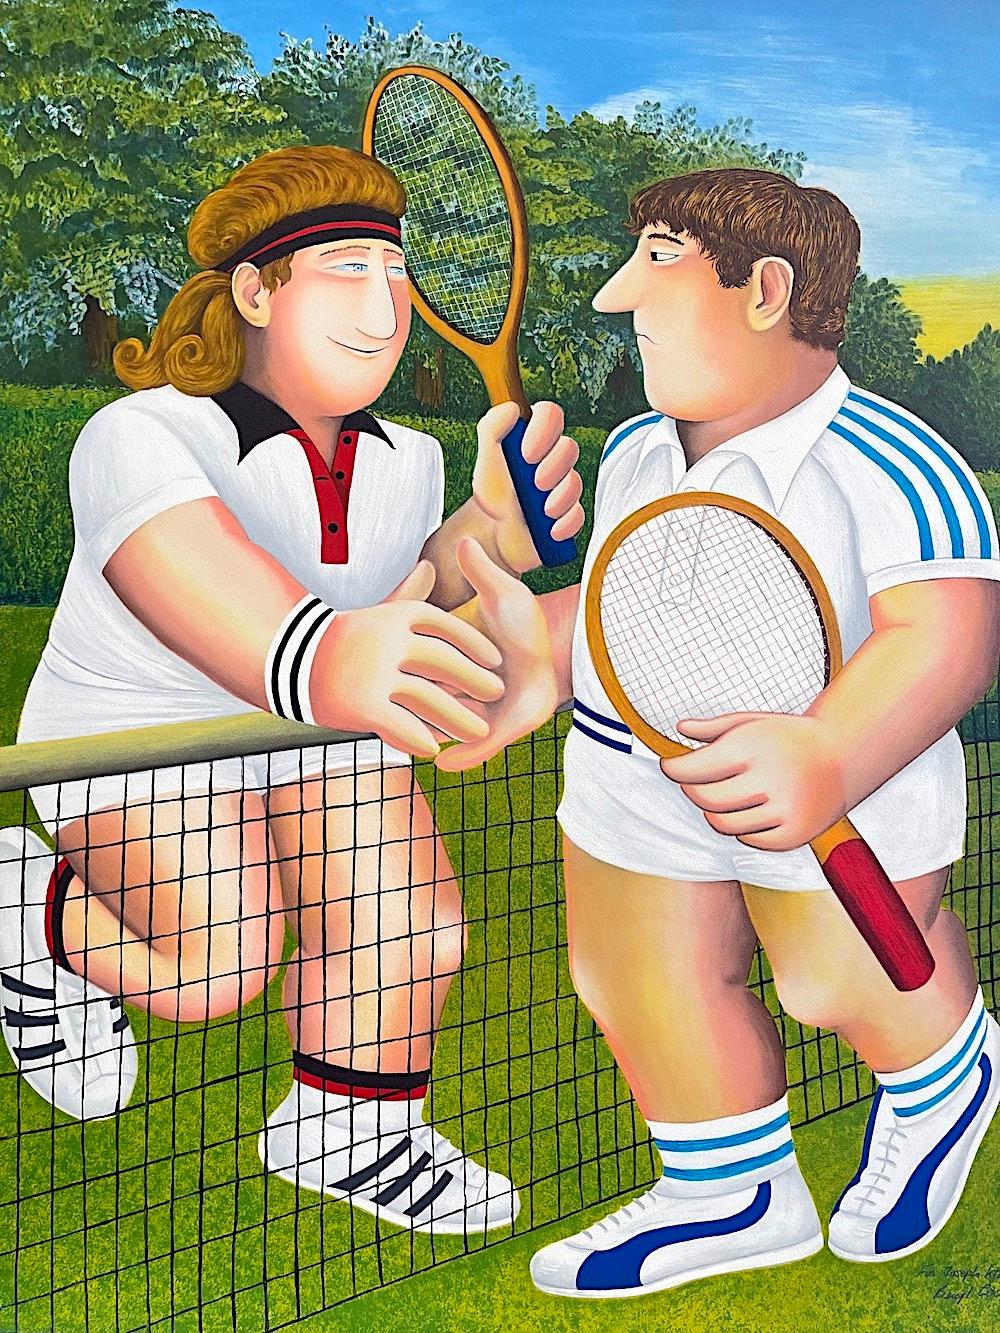 Beryl Cook Portrait Print - TENNIS Signed Lithograph, Tennis Match Borg vs. Connors Rivalry, British Humor